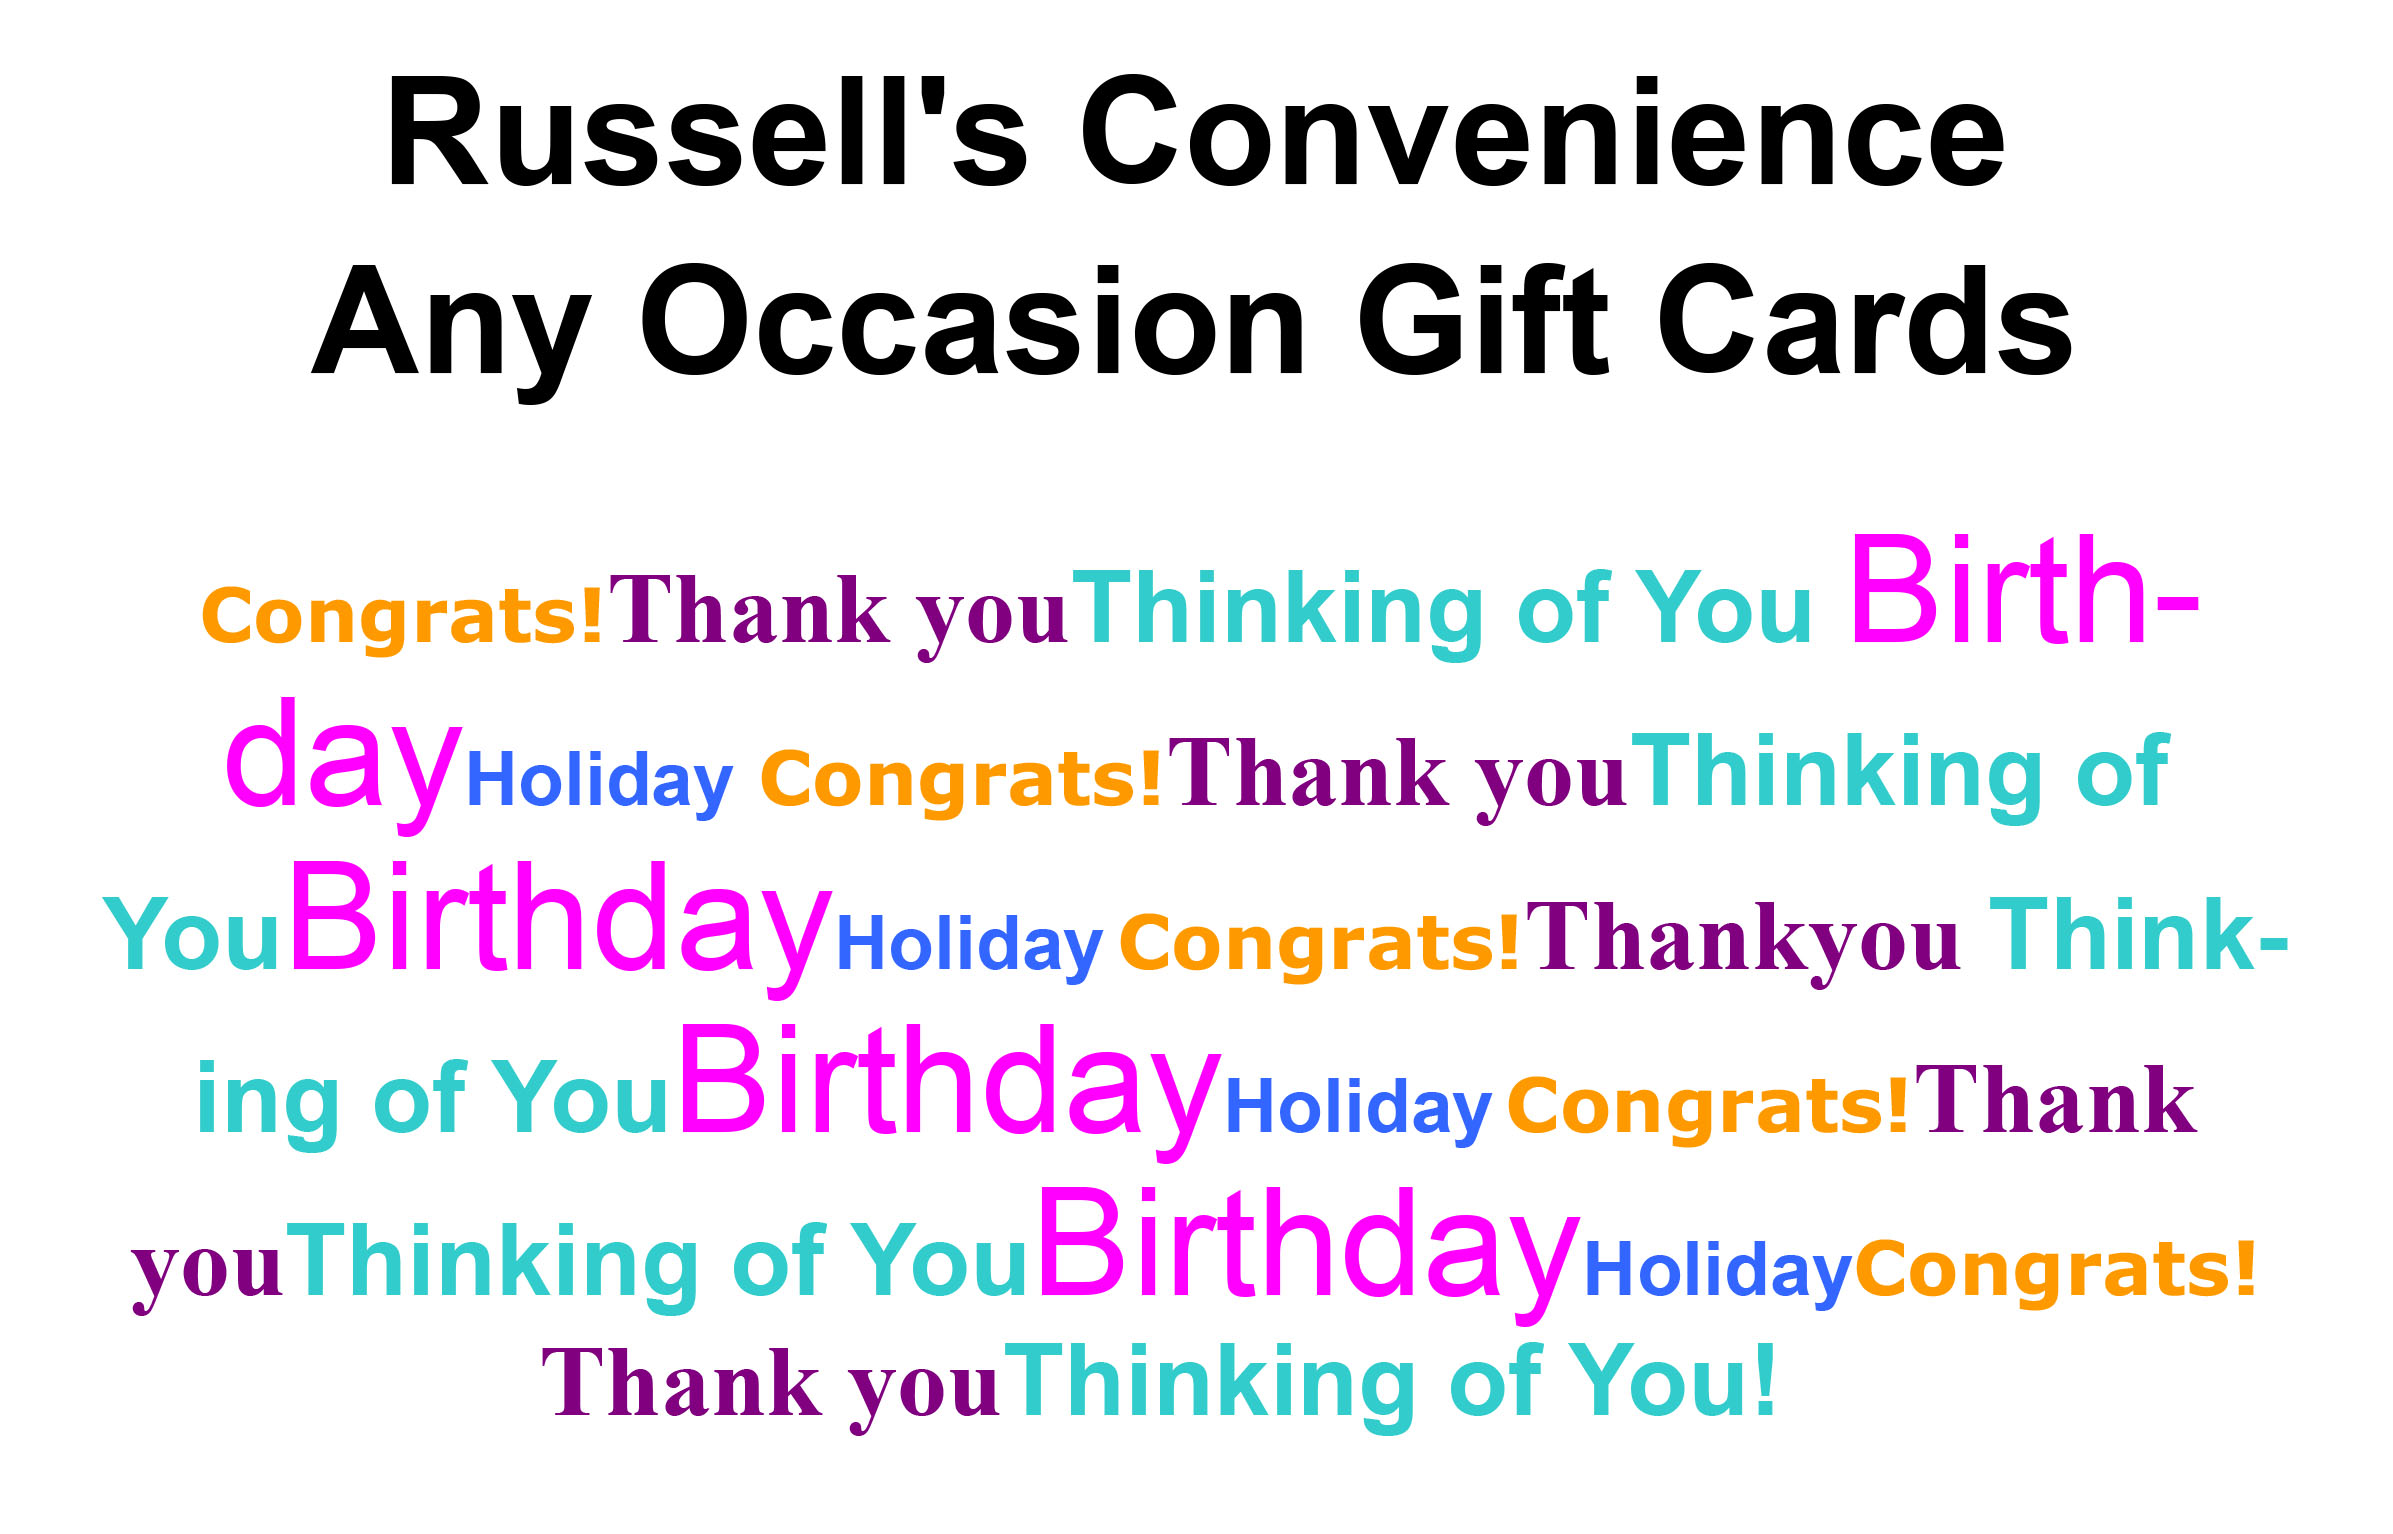 List of reasons to purchase a Russells gift card. Thankyou - birthday - congratulations and other special occasions